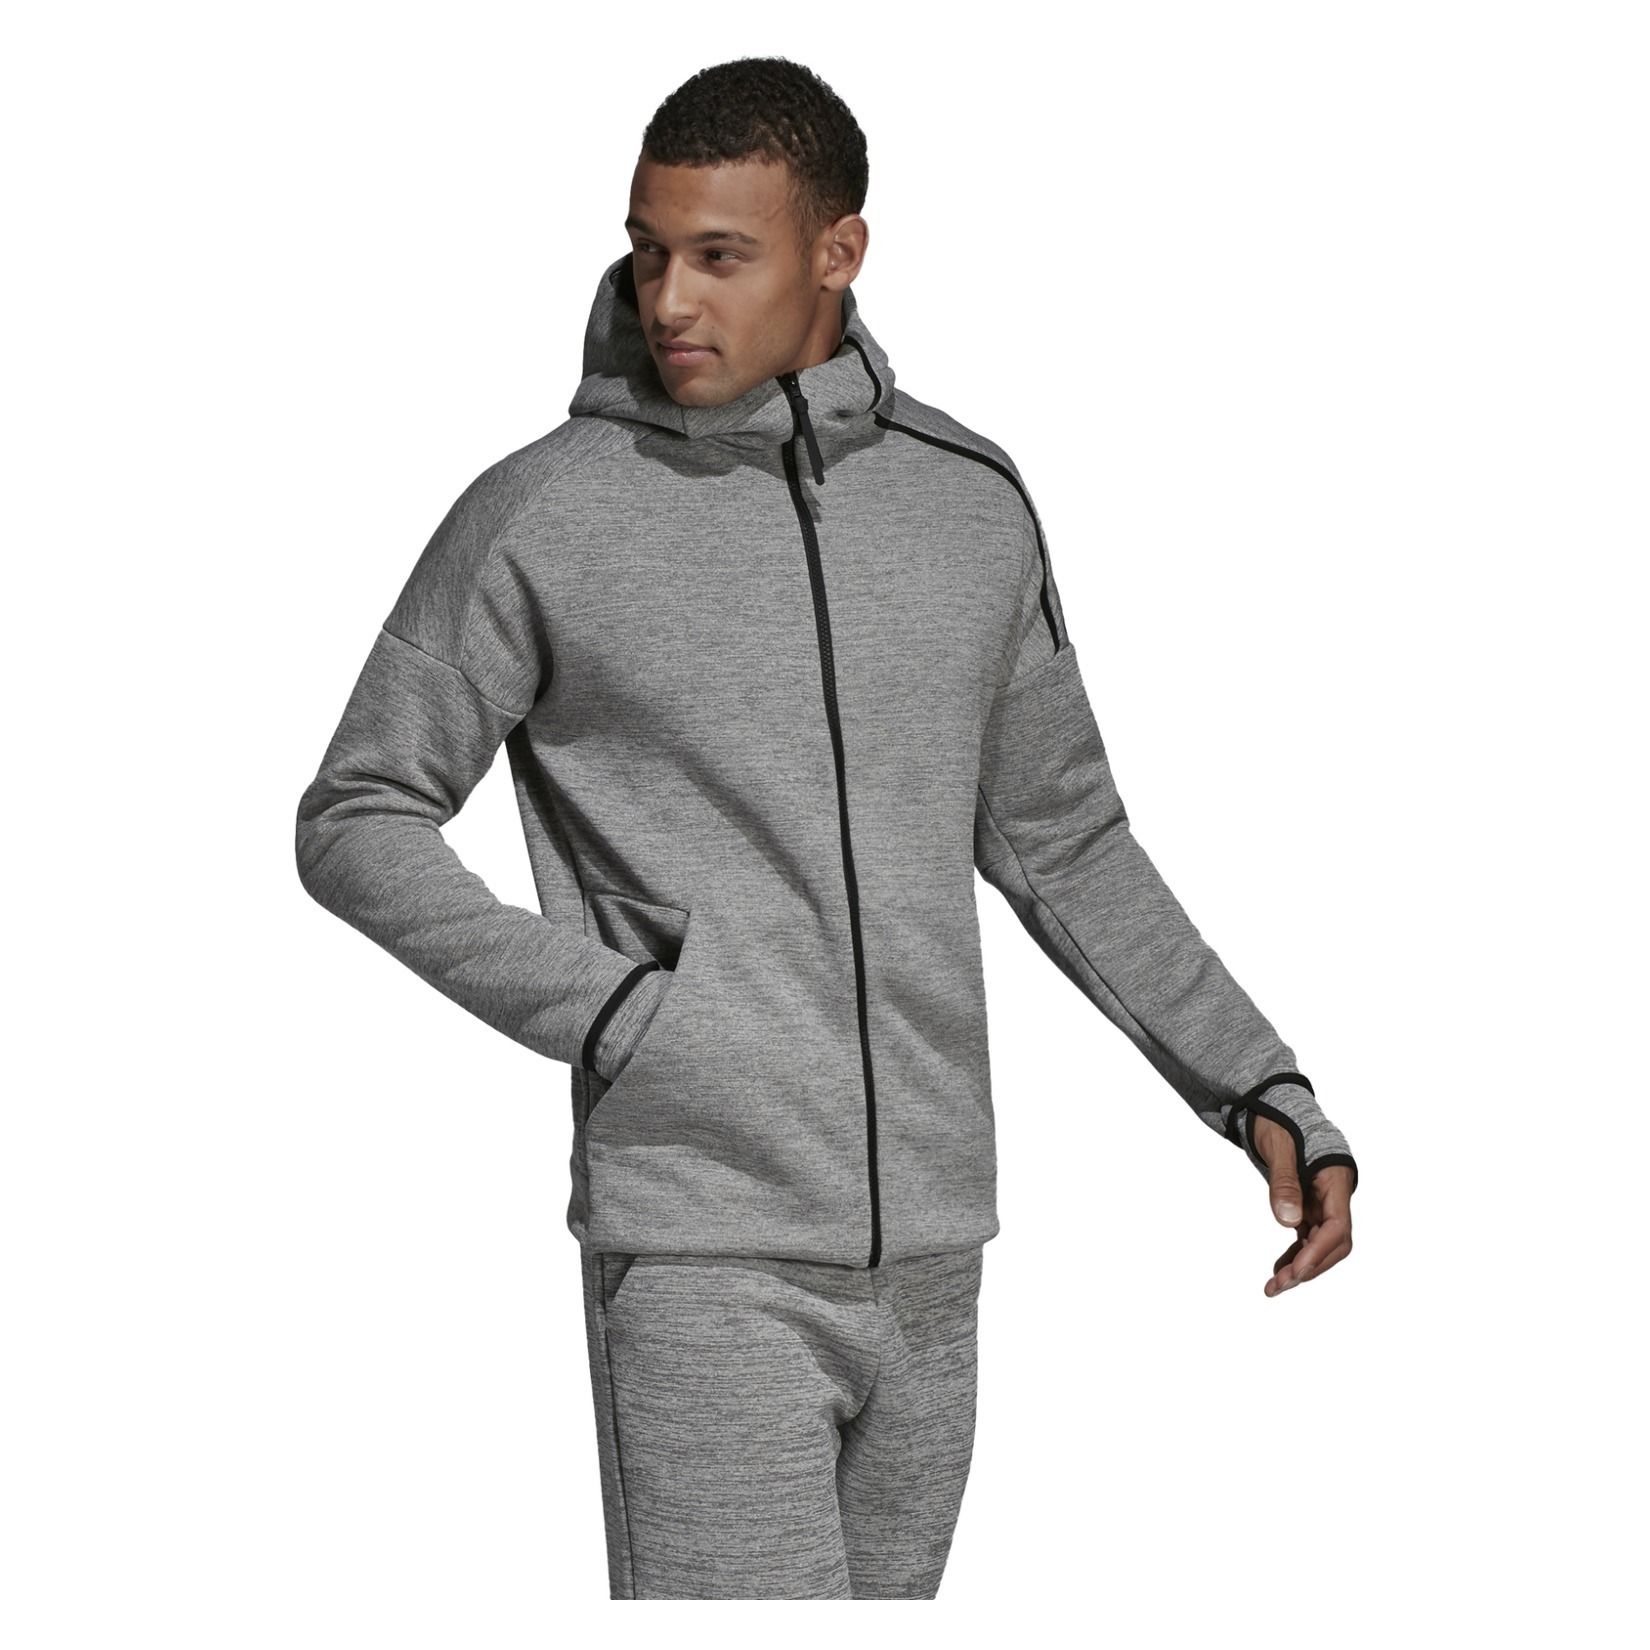 Adidas Zne Hoodie Fast Release Cheap Sale, 55% OFF | sportsregras.com